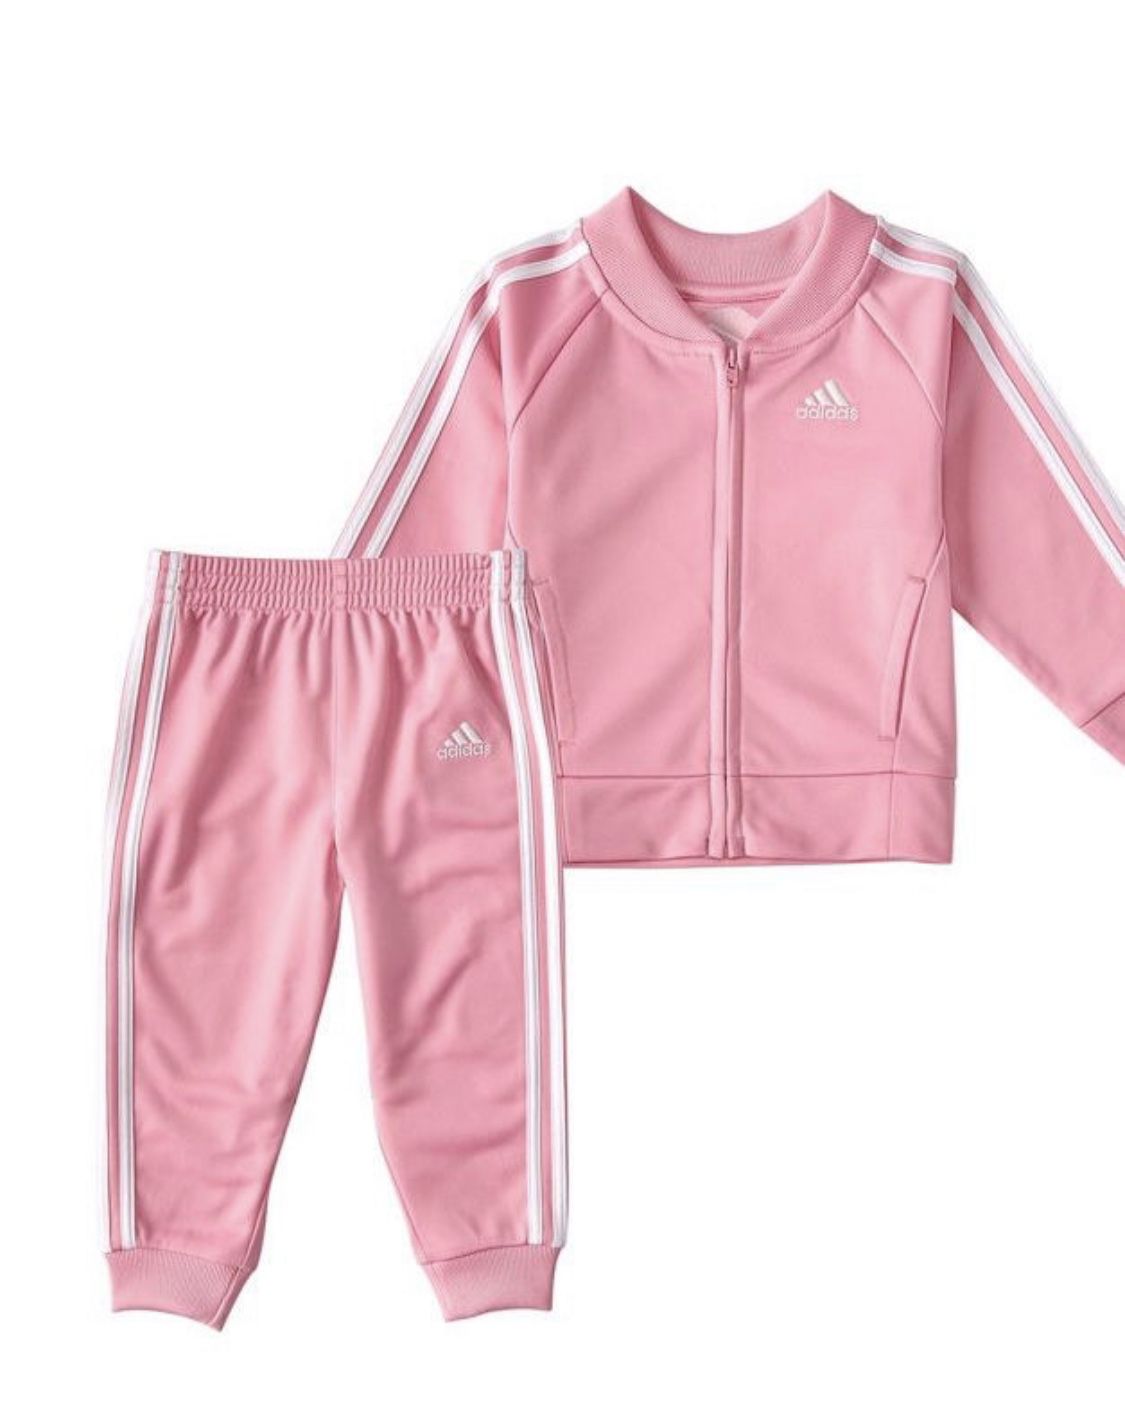 Adidas Outfit For Baby 0-3 Months 